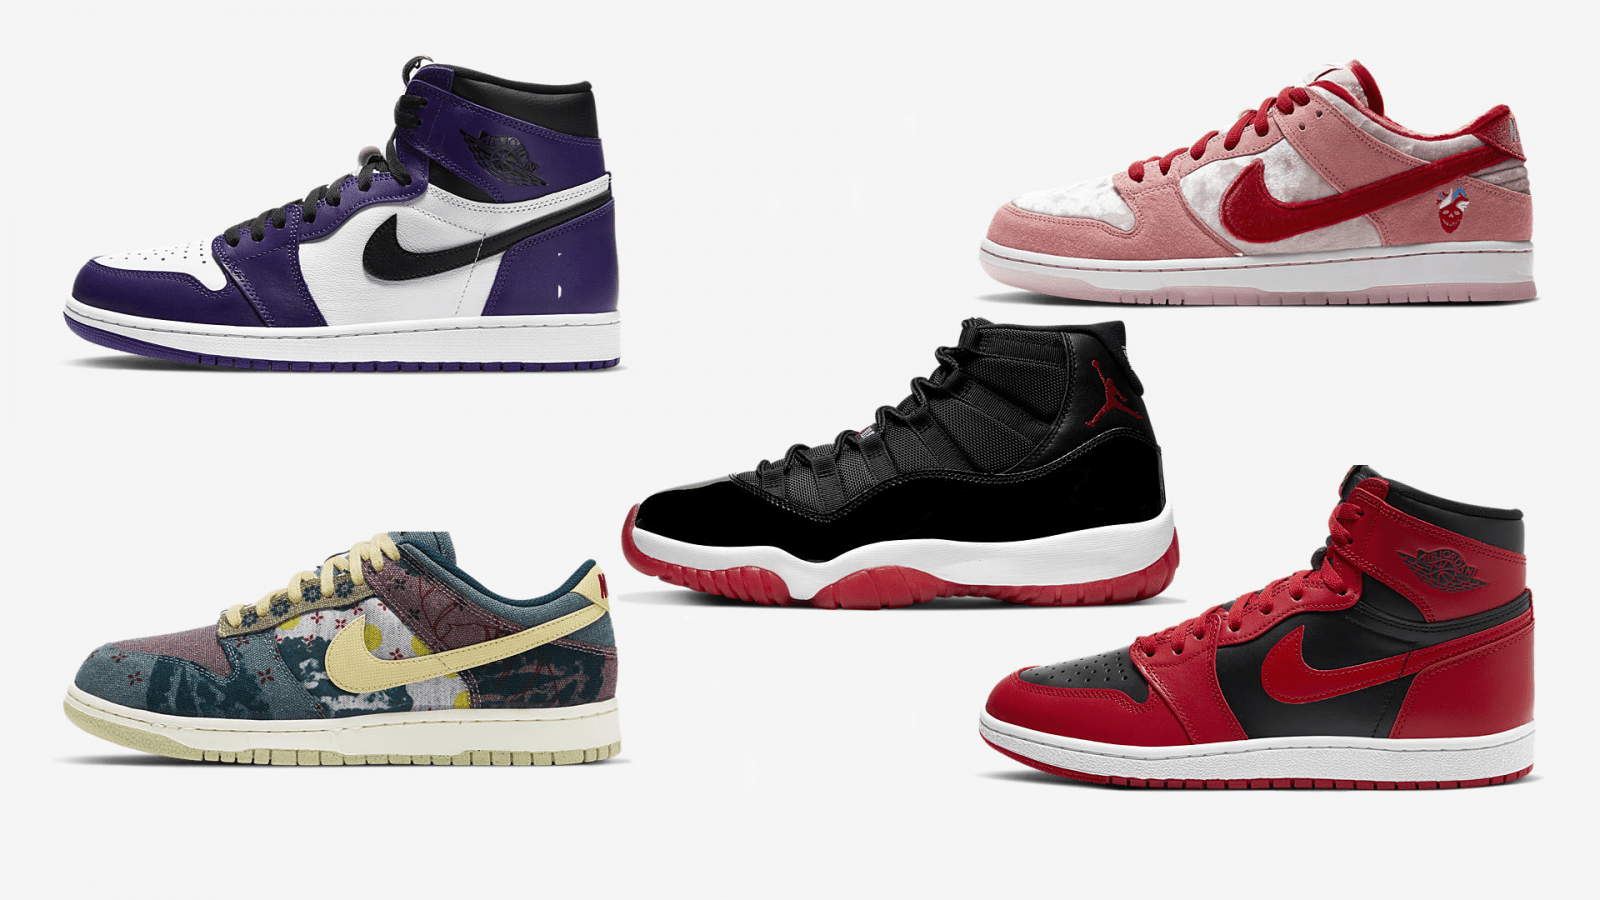 All About the HEAT: 10 Hot Nike Pairs Dropping Next Week